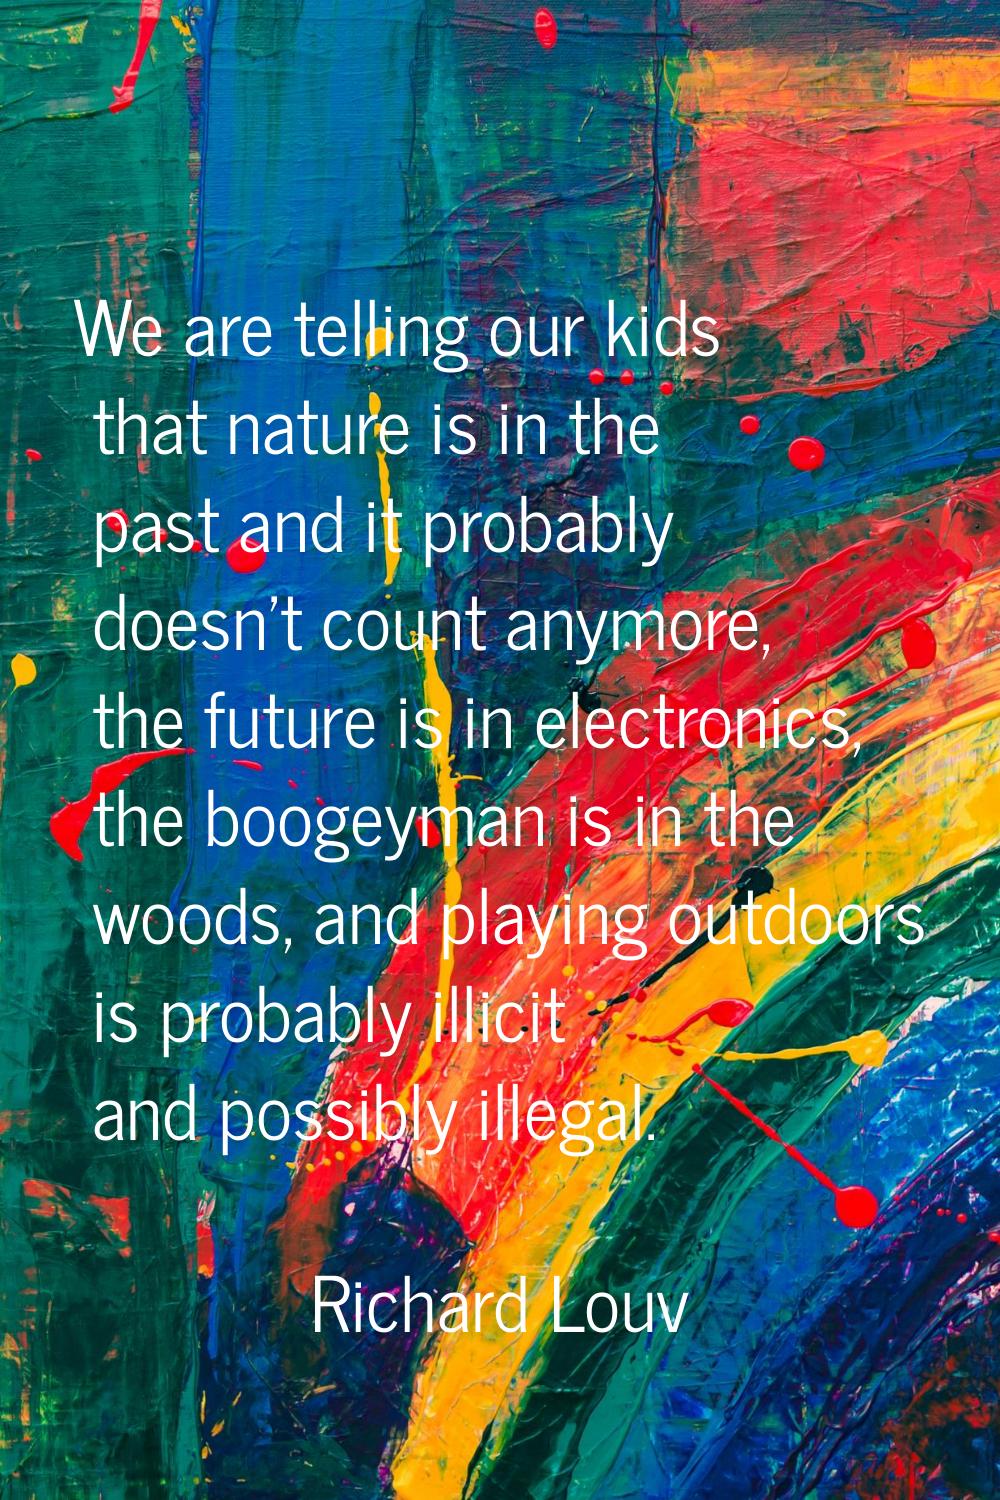 We are telling our kids that nature is in the past and it probably doesn't count anymore, the futur